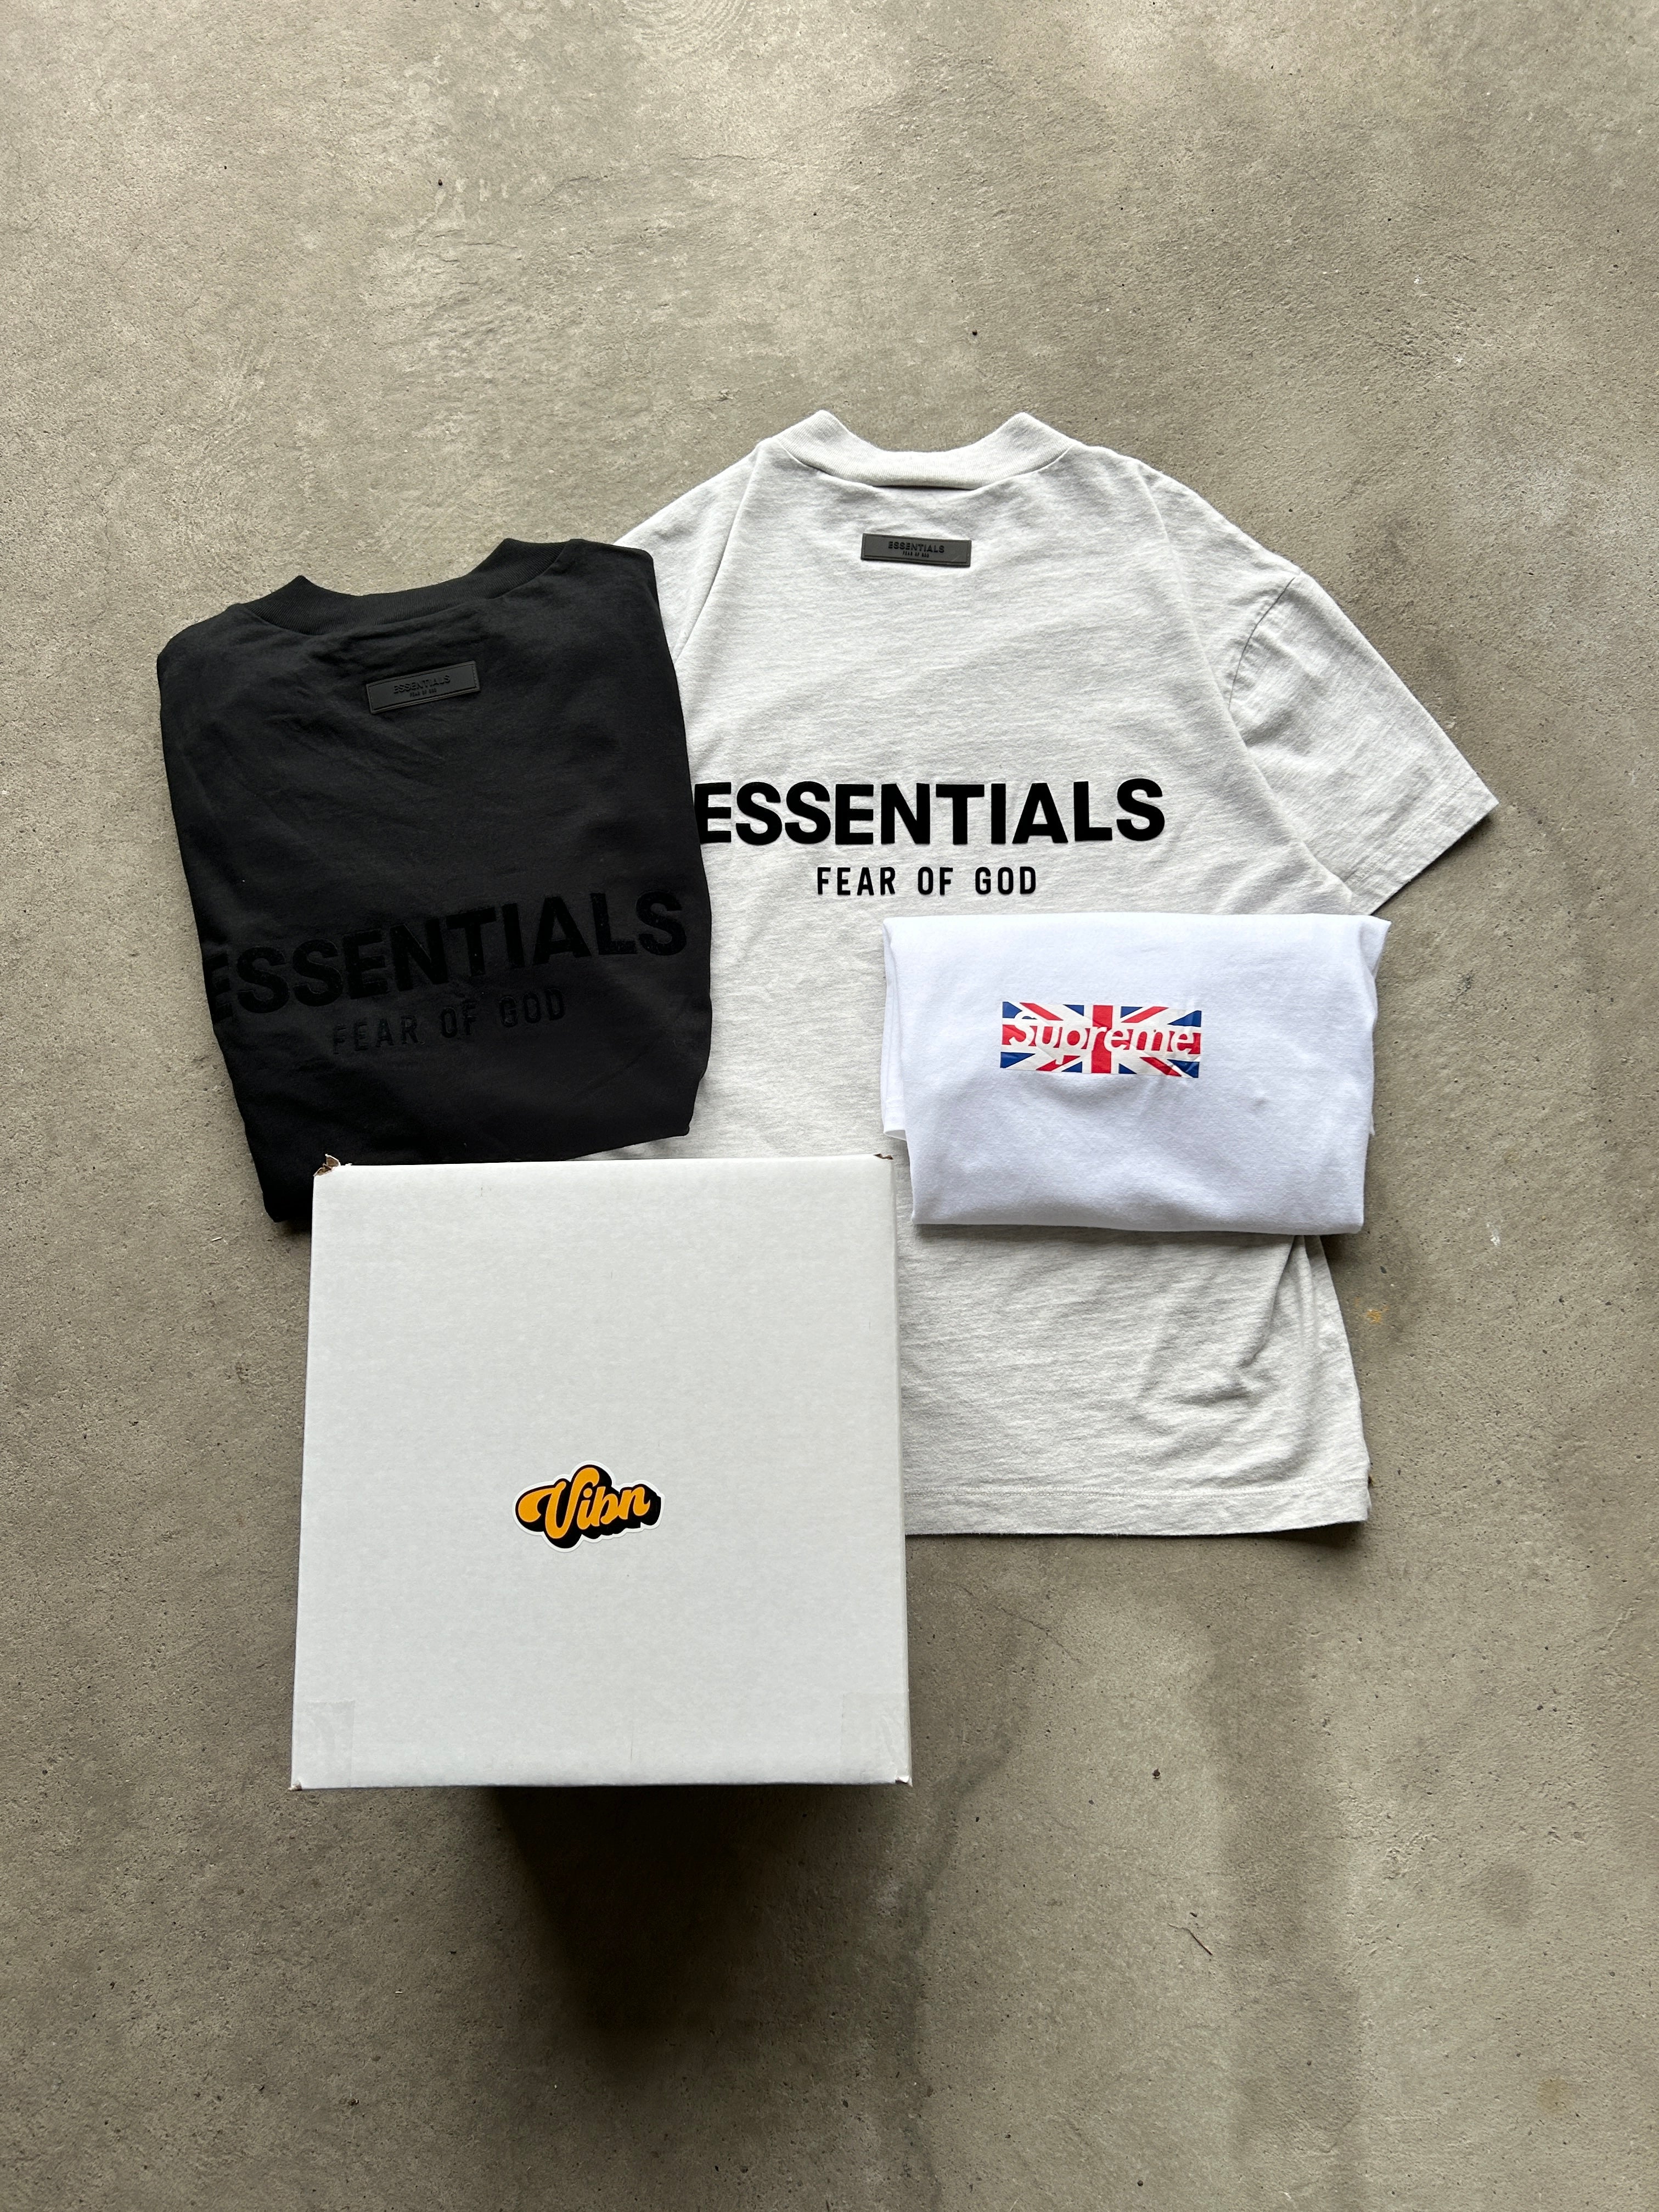 Summer Hype Mystery Box - 3 Pack ($450 Value)